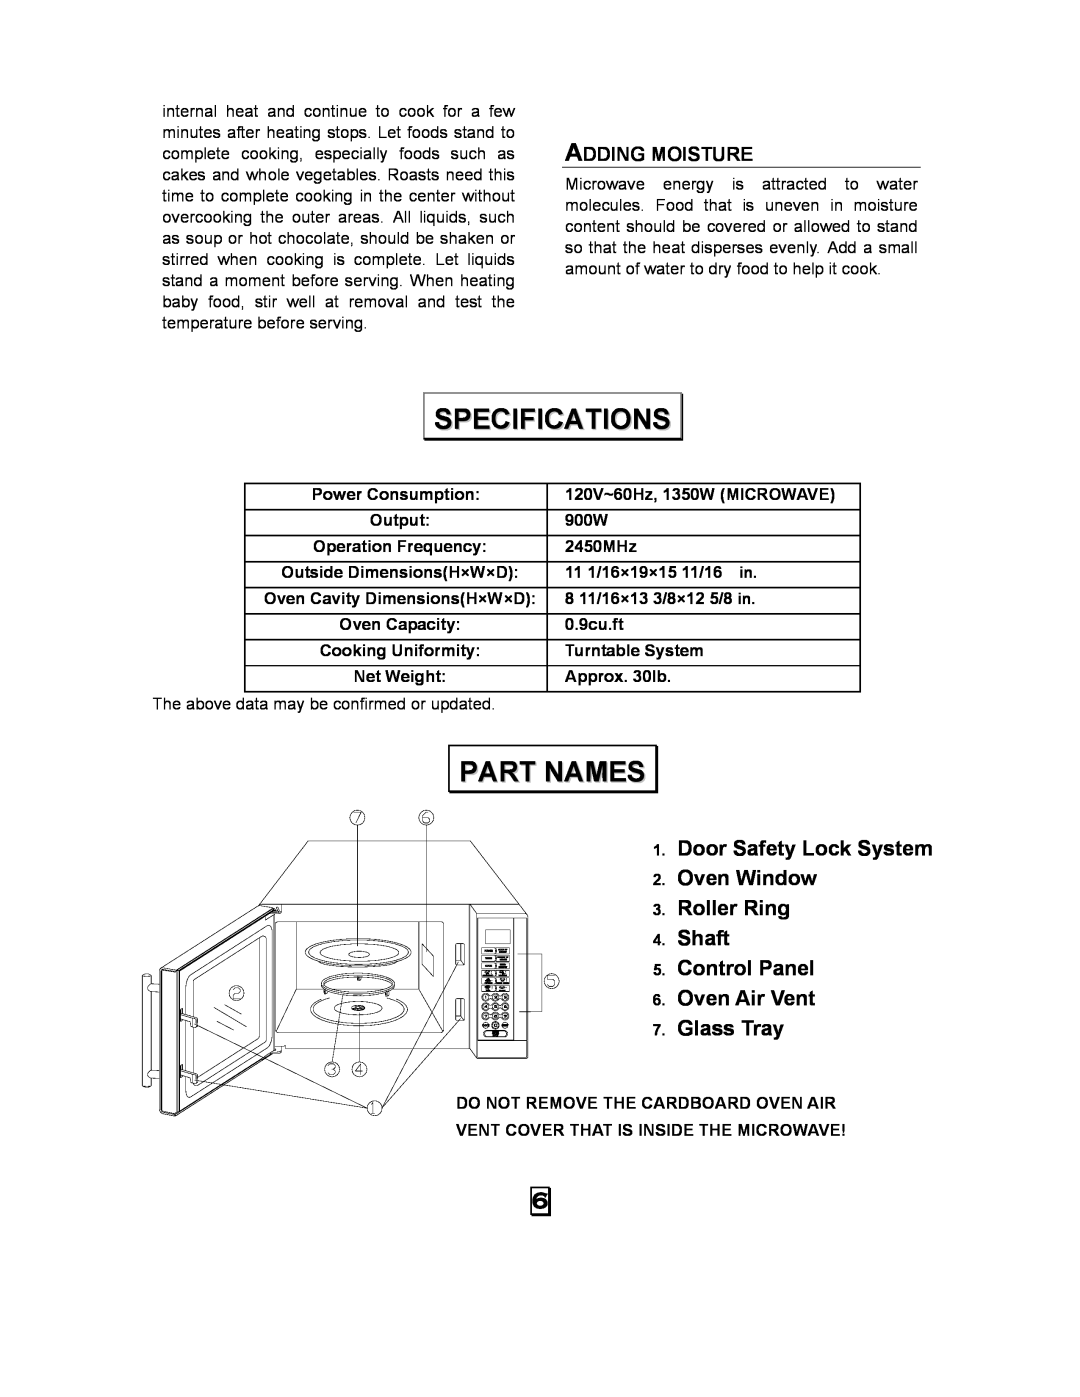 Kenmore 87043 owner manual Specifications, Part Names, Adding Moisture, Oven Air Vent Glass Tray 